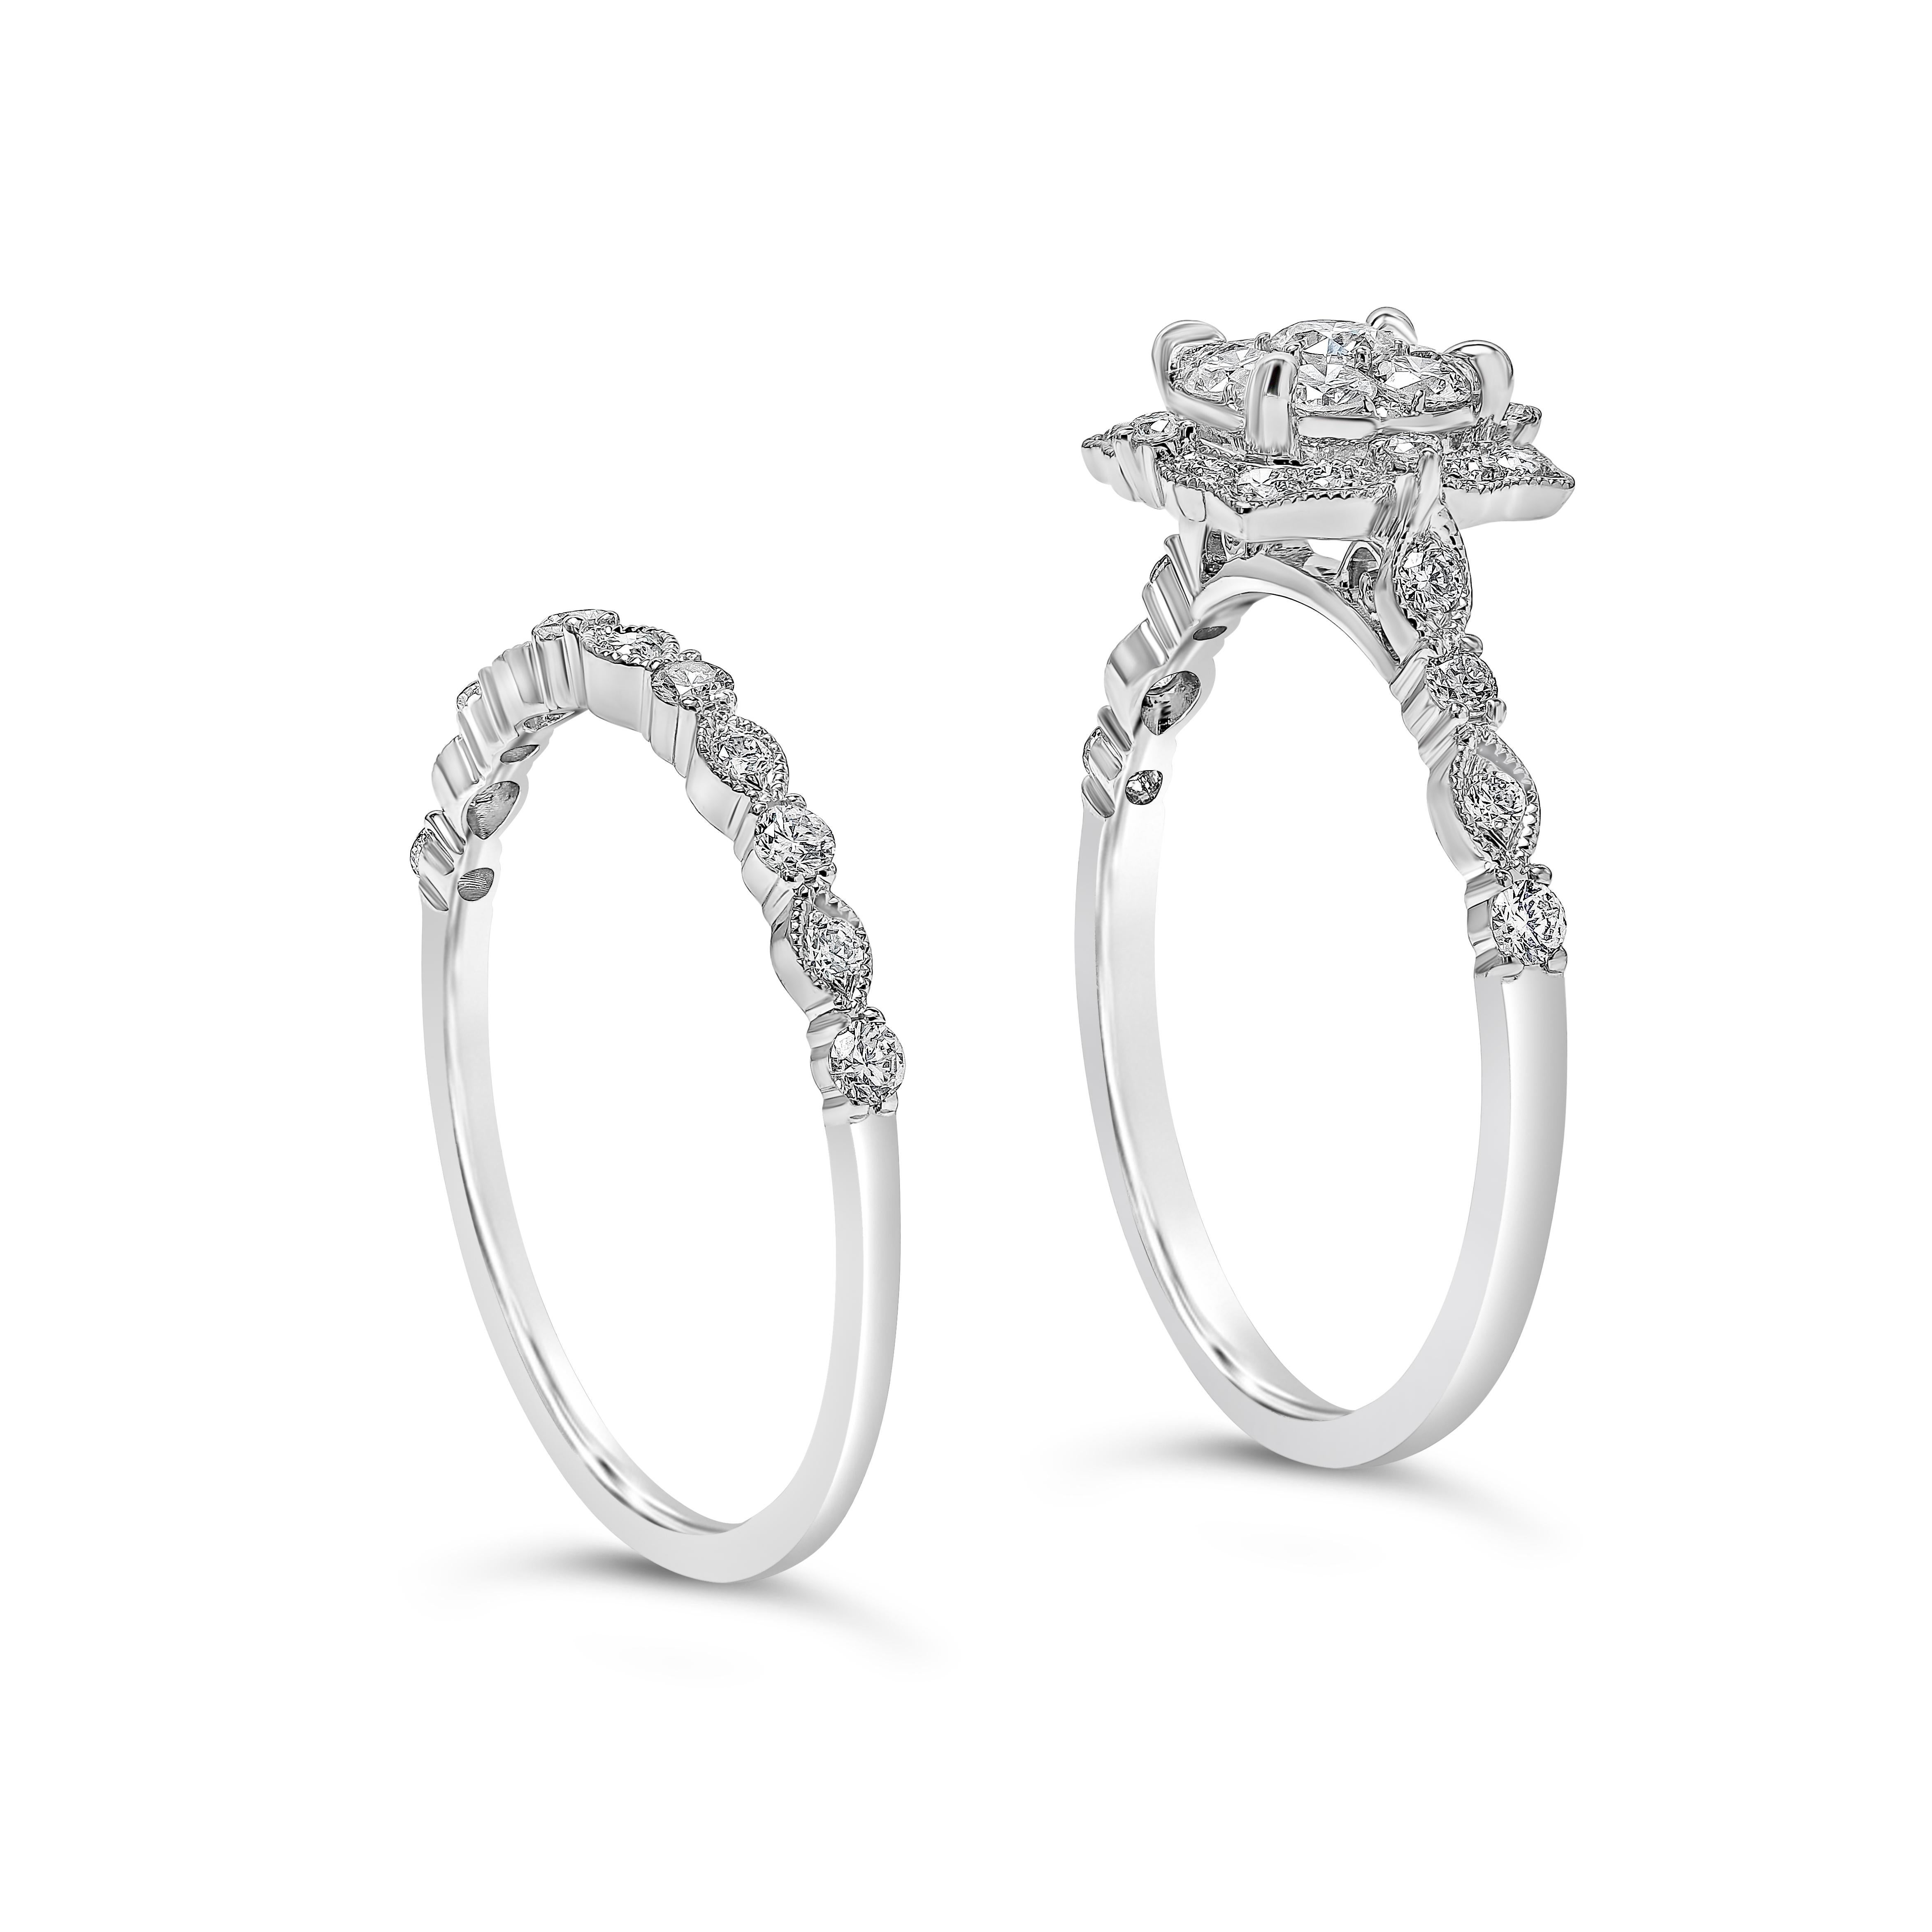 A unique and stylish engagement ring showcasing a cluster of round diamonds, set in an intricately-designed halo and mounting accented with diamonds. Accompanied with a matching wedding band. Diamonds weigh 0.71 carats total. Made with 14K White